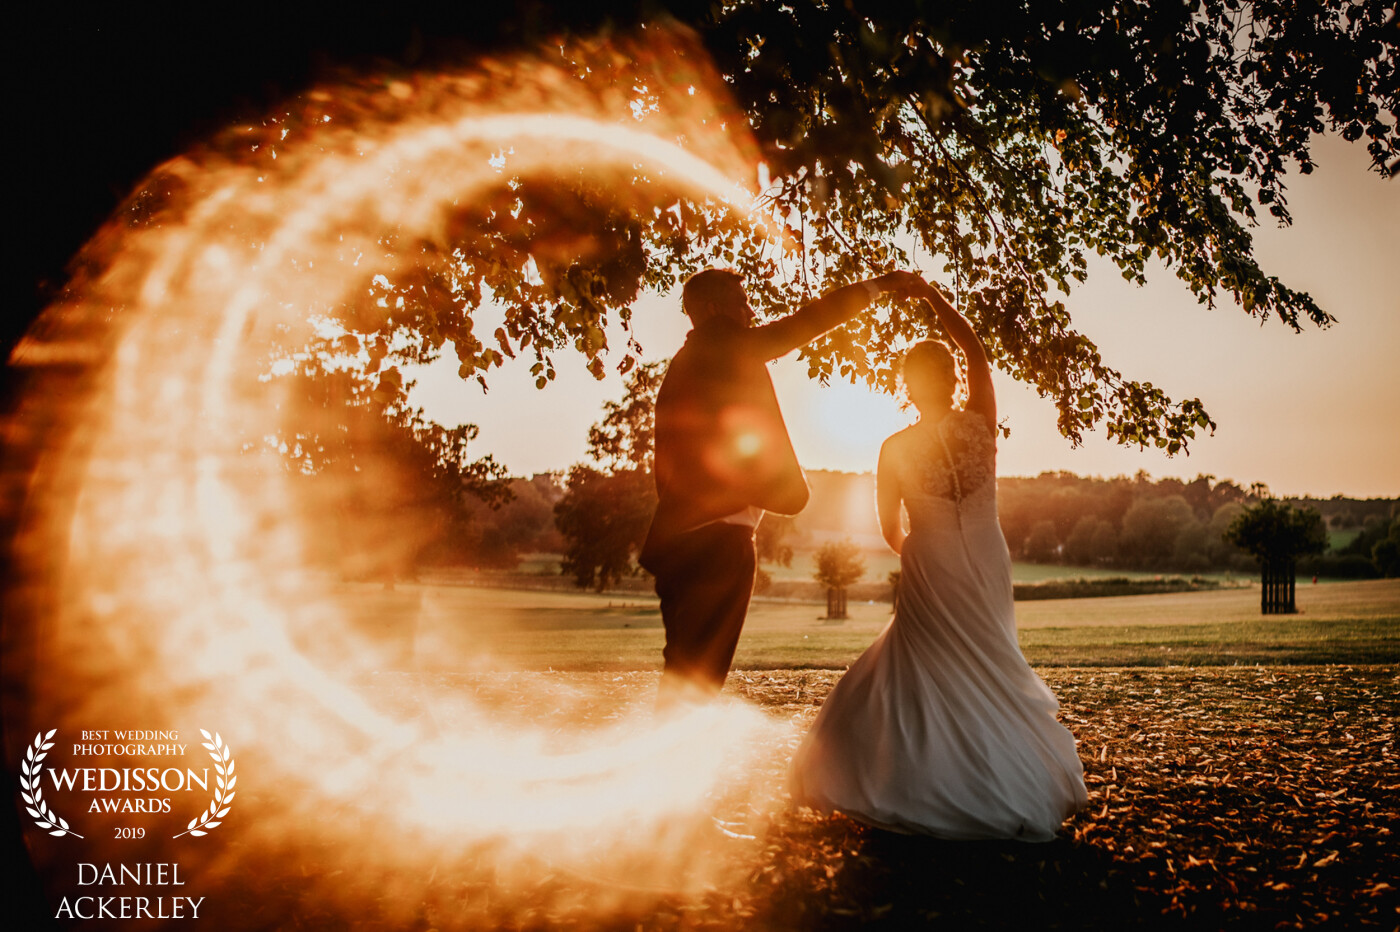 The sunset was amazing but we had a very overcast day here in England so I waited until the sun managed to pop out for a minute, I asked Rebecca & Ash to practice the first dance, and then this happened... magic!